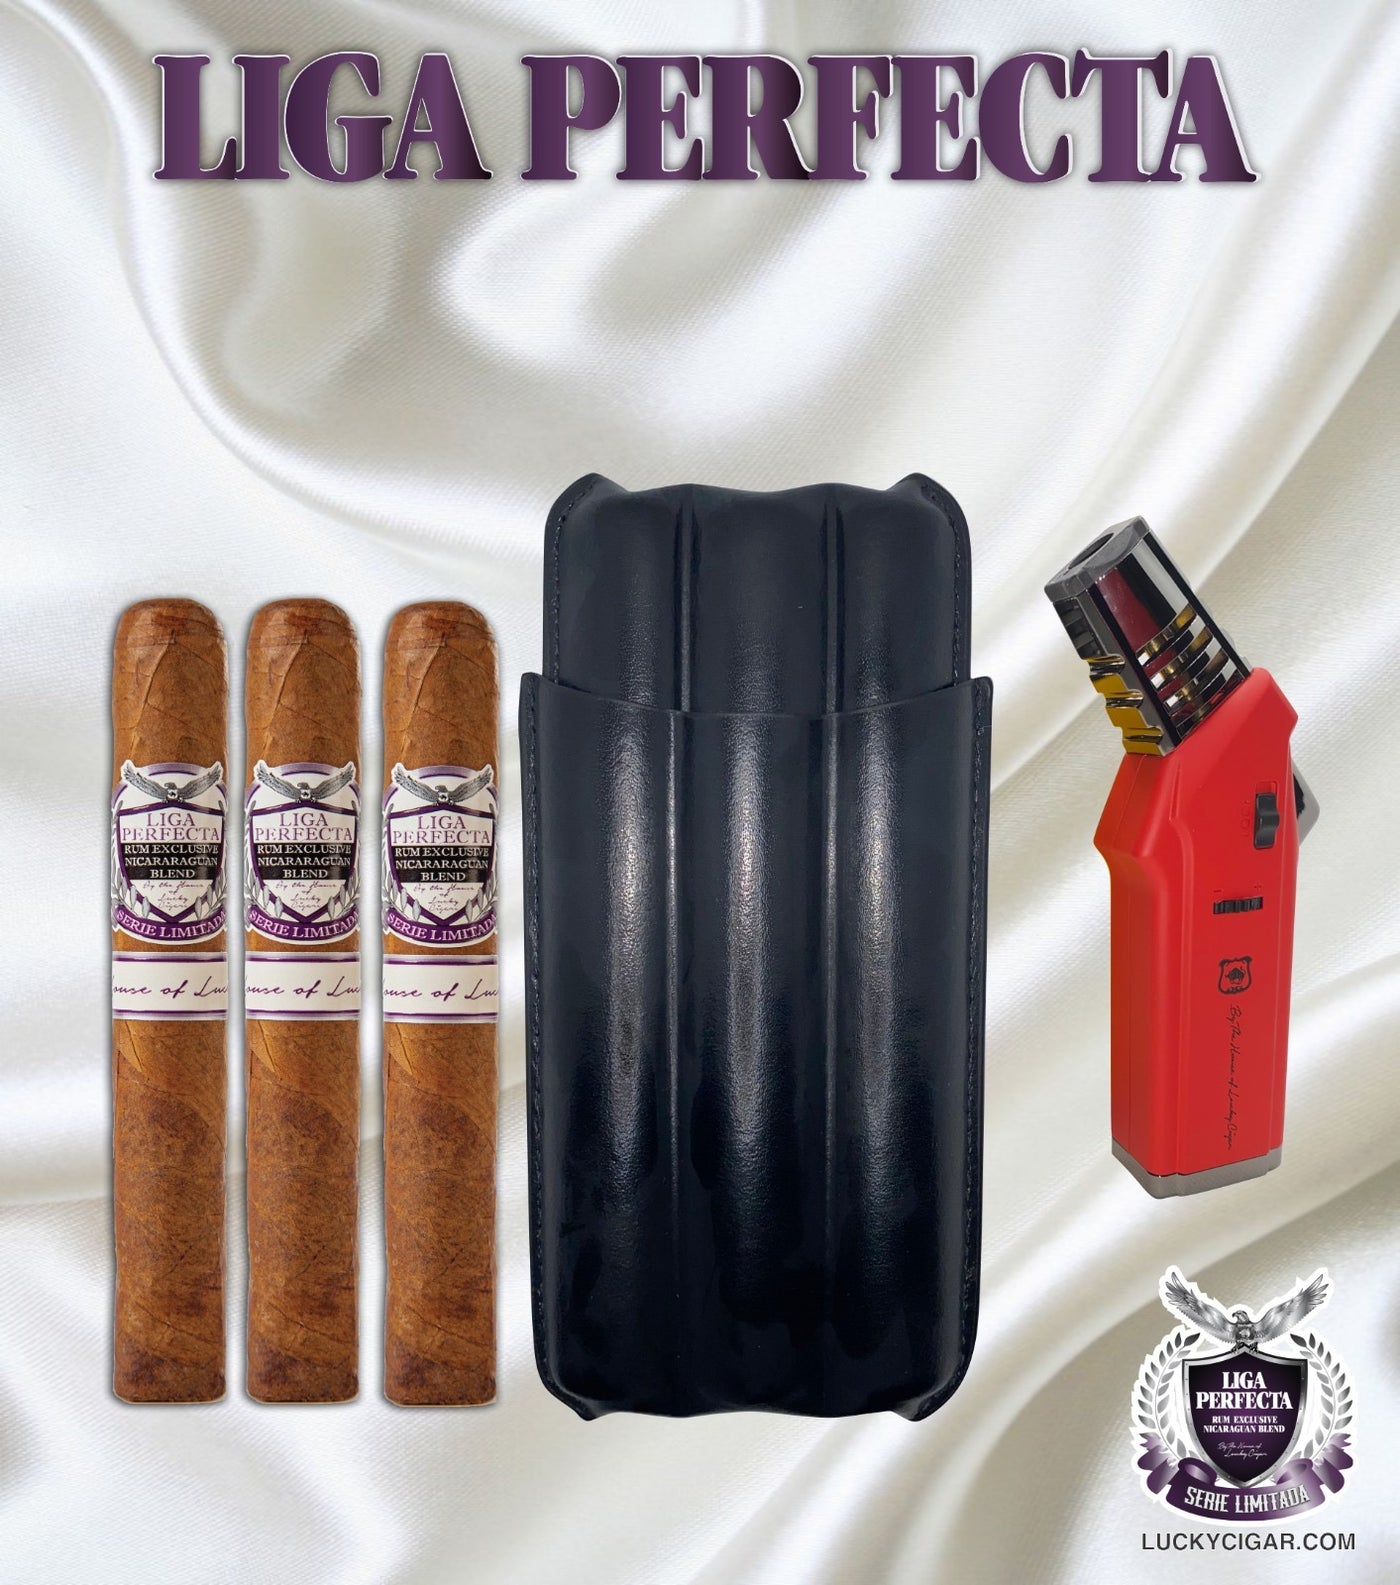 Lucky Cigar Sampler Sets: Set of 3 Liga Perfecta Cigars with Travel Humidor Case, Torch